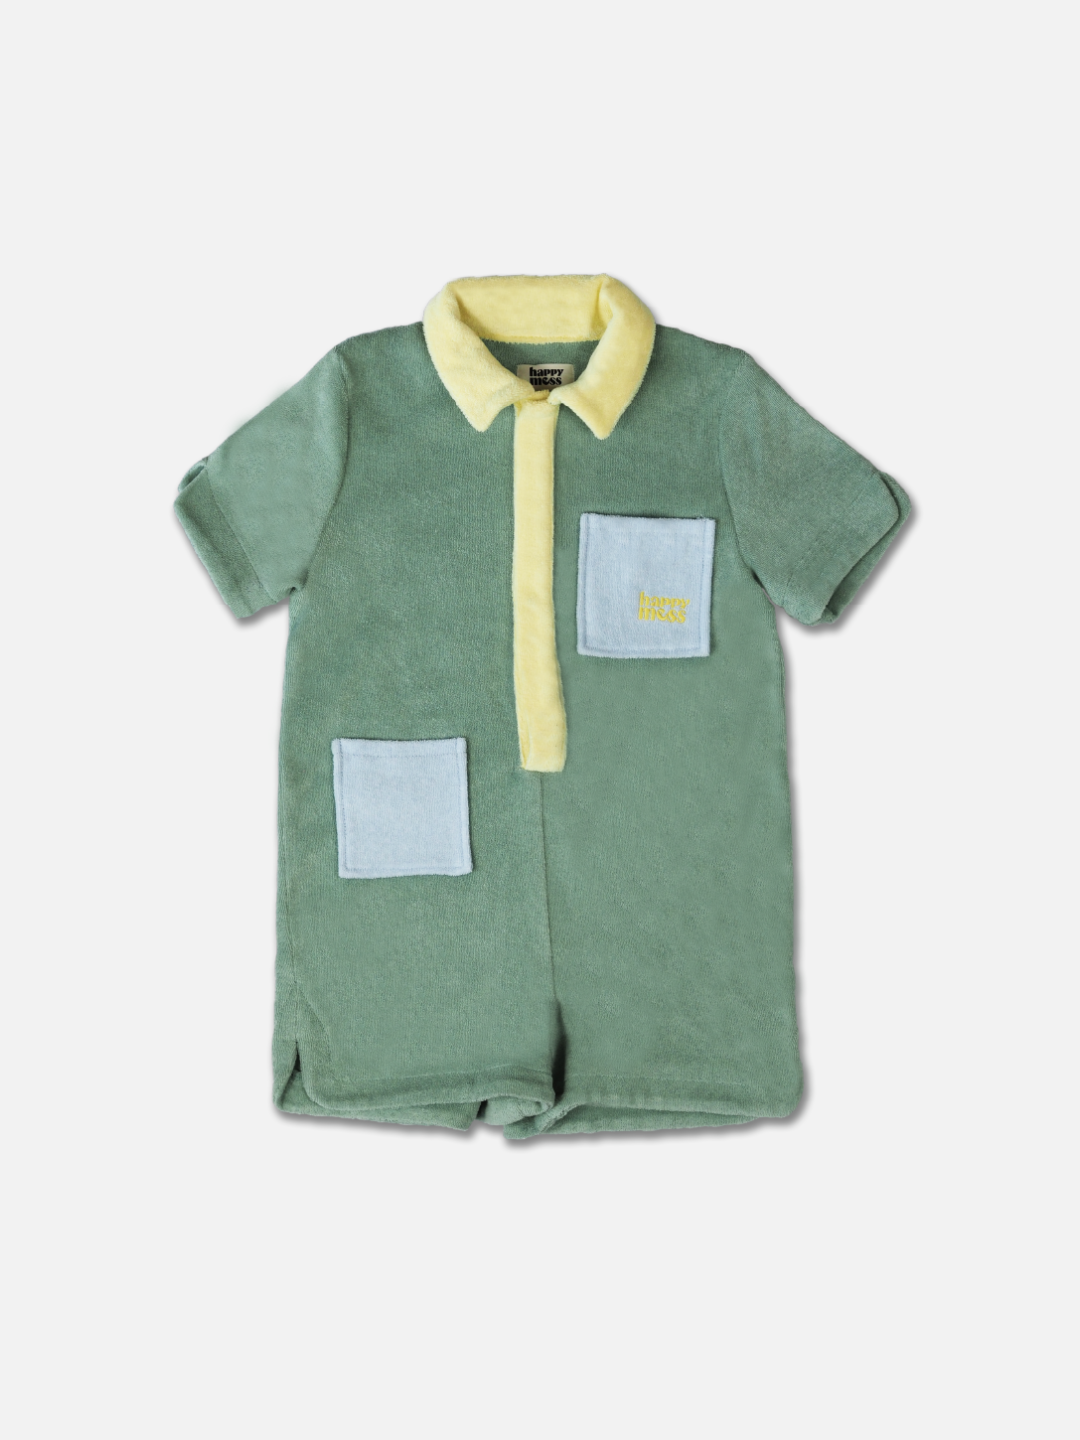 A pale green kids' jumpsuit with yellow collar and placket and two pale blue pockets